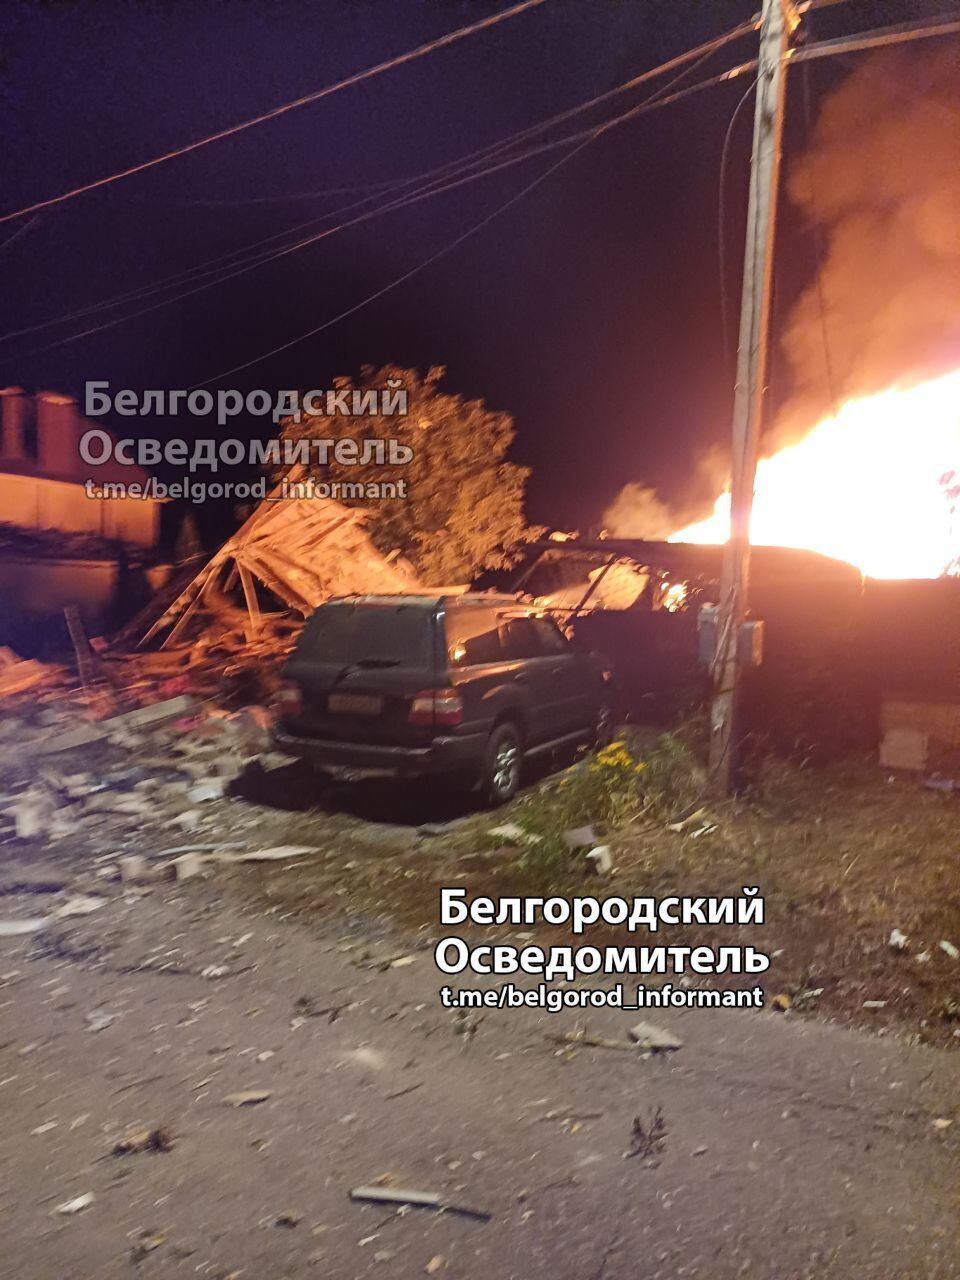 ''The situation continues to be difficult'': residents of Russian Belgorod are already being offered to evacuate the city